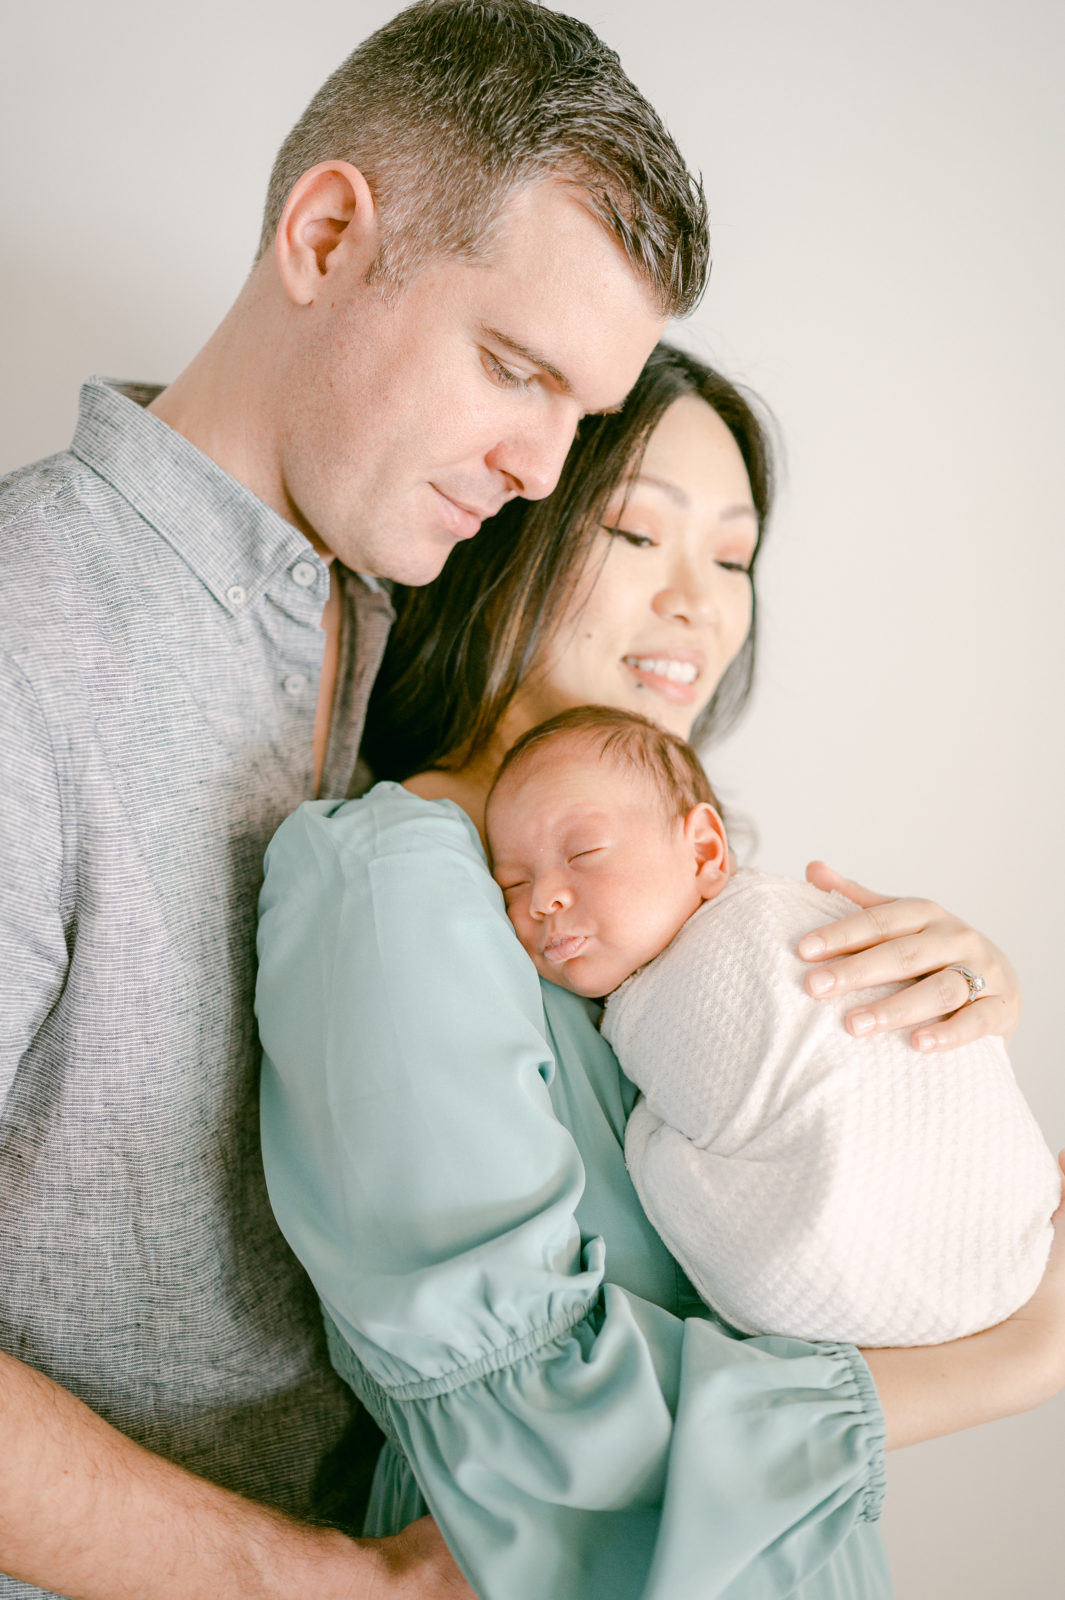 New family portrait of dad, mom and newborn